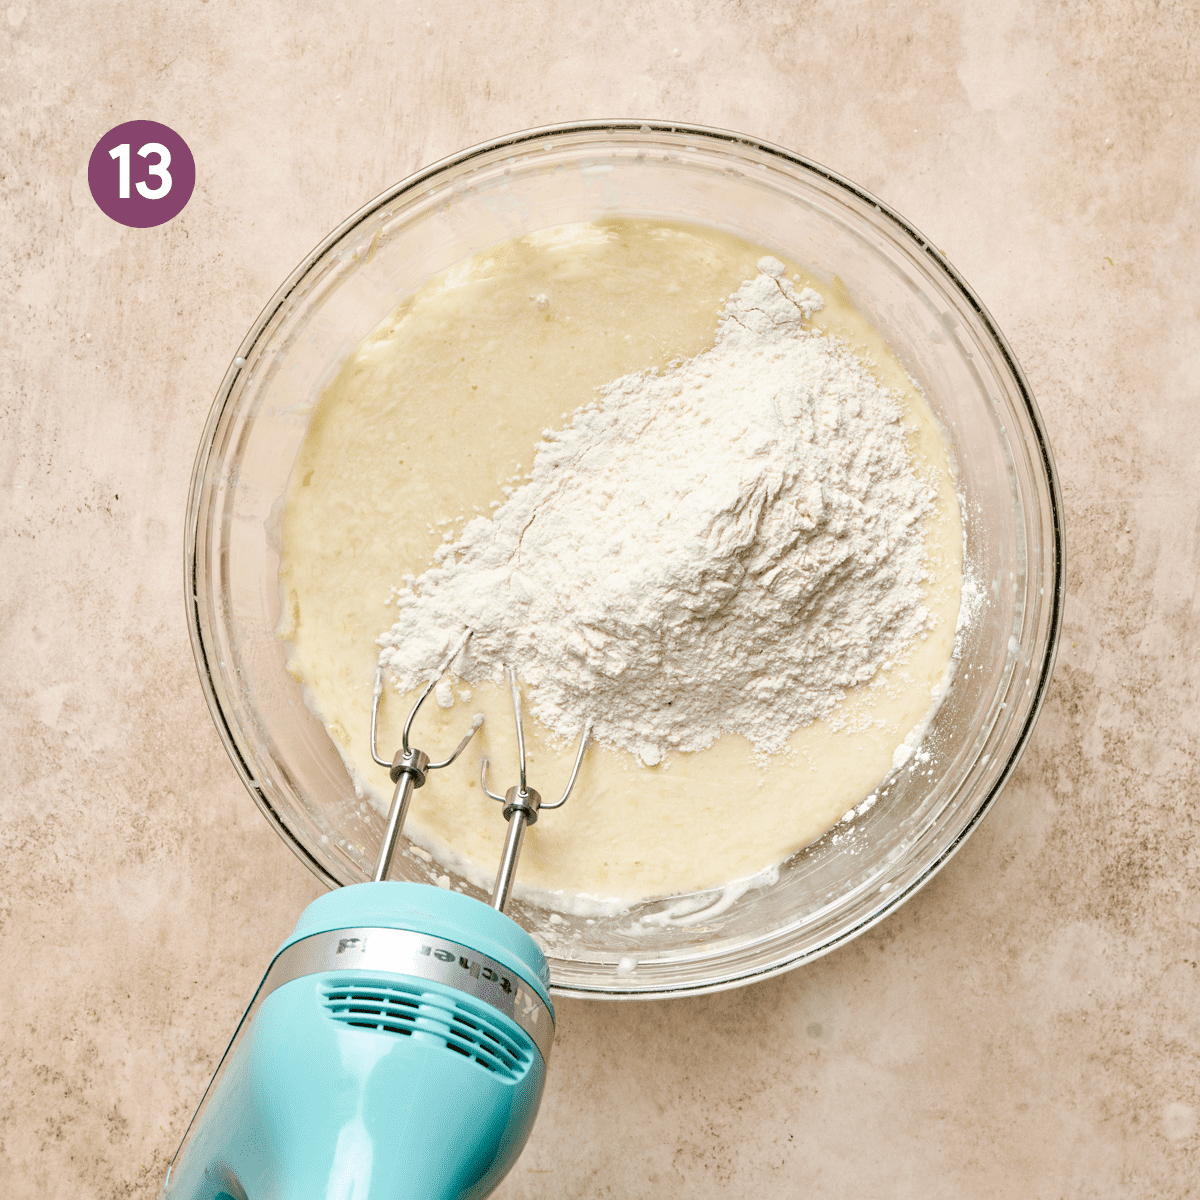 light blue electric mixer in a glass bowl of liquid ingredients with flour on top.